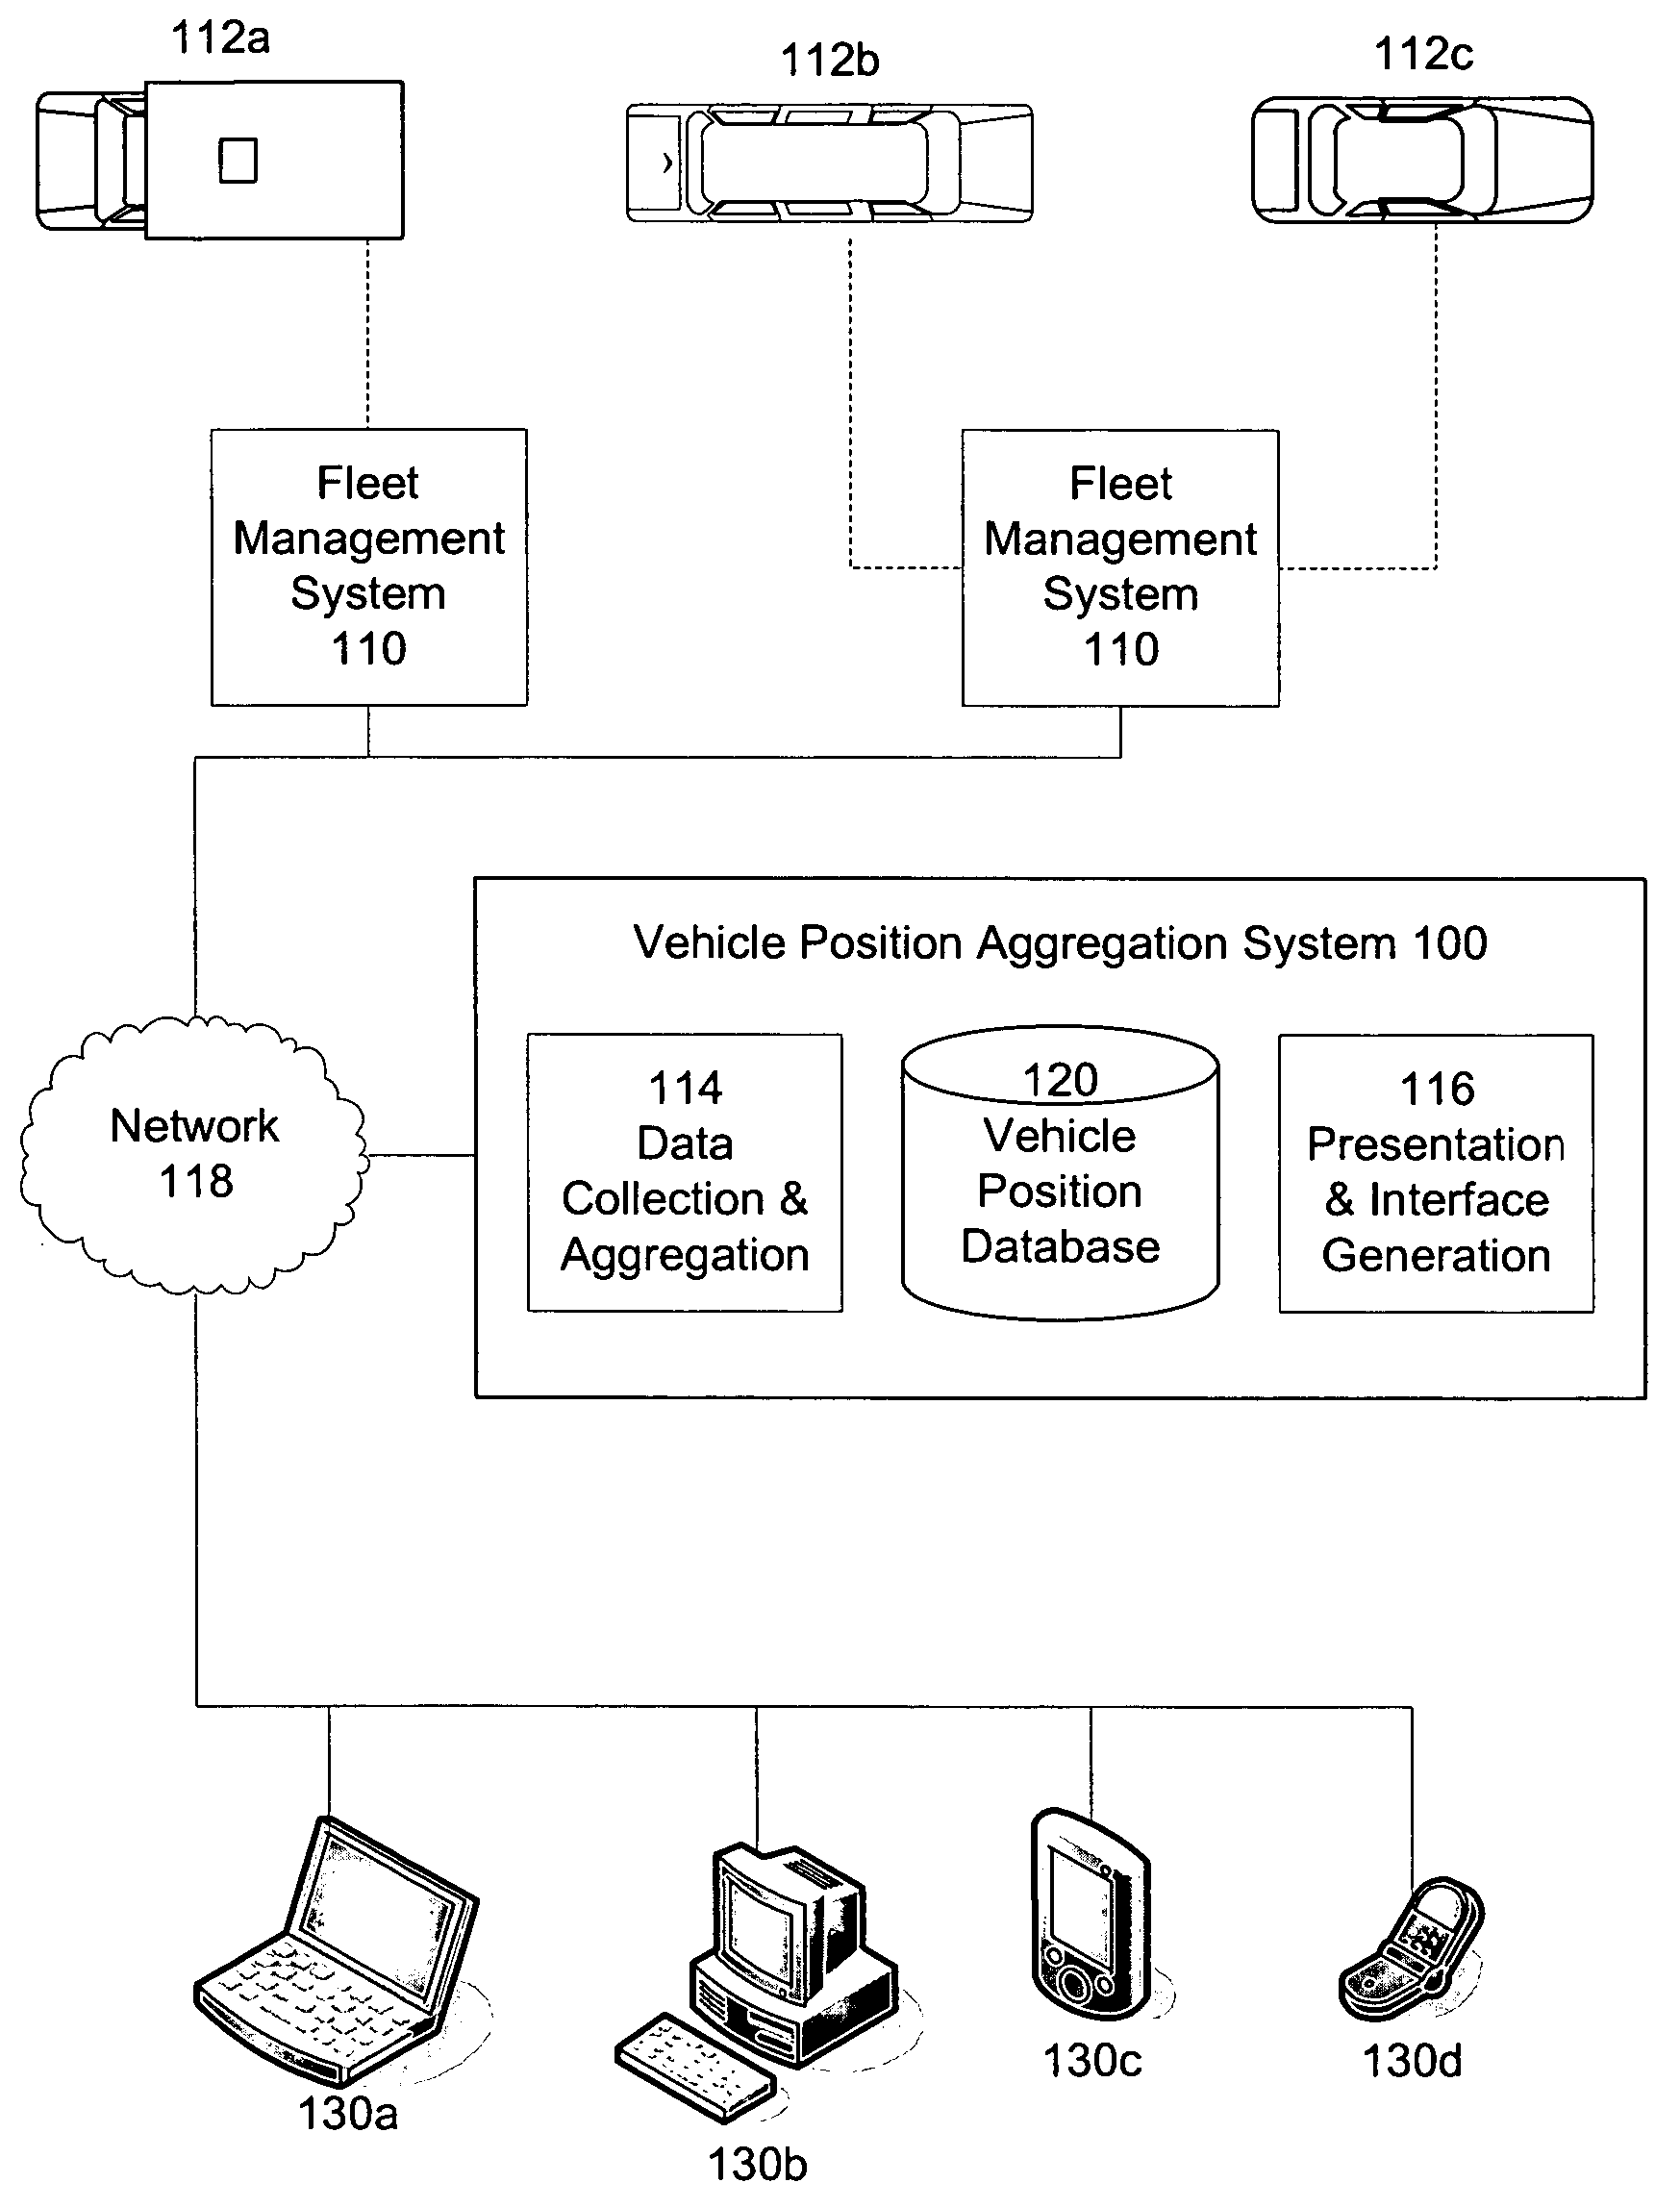 User location driven identification of service vehicles